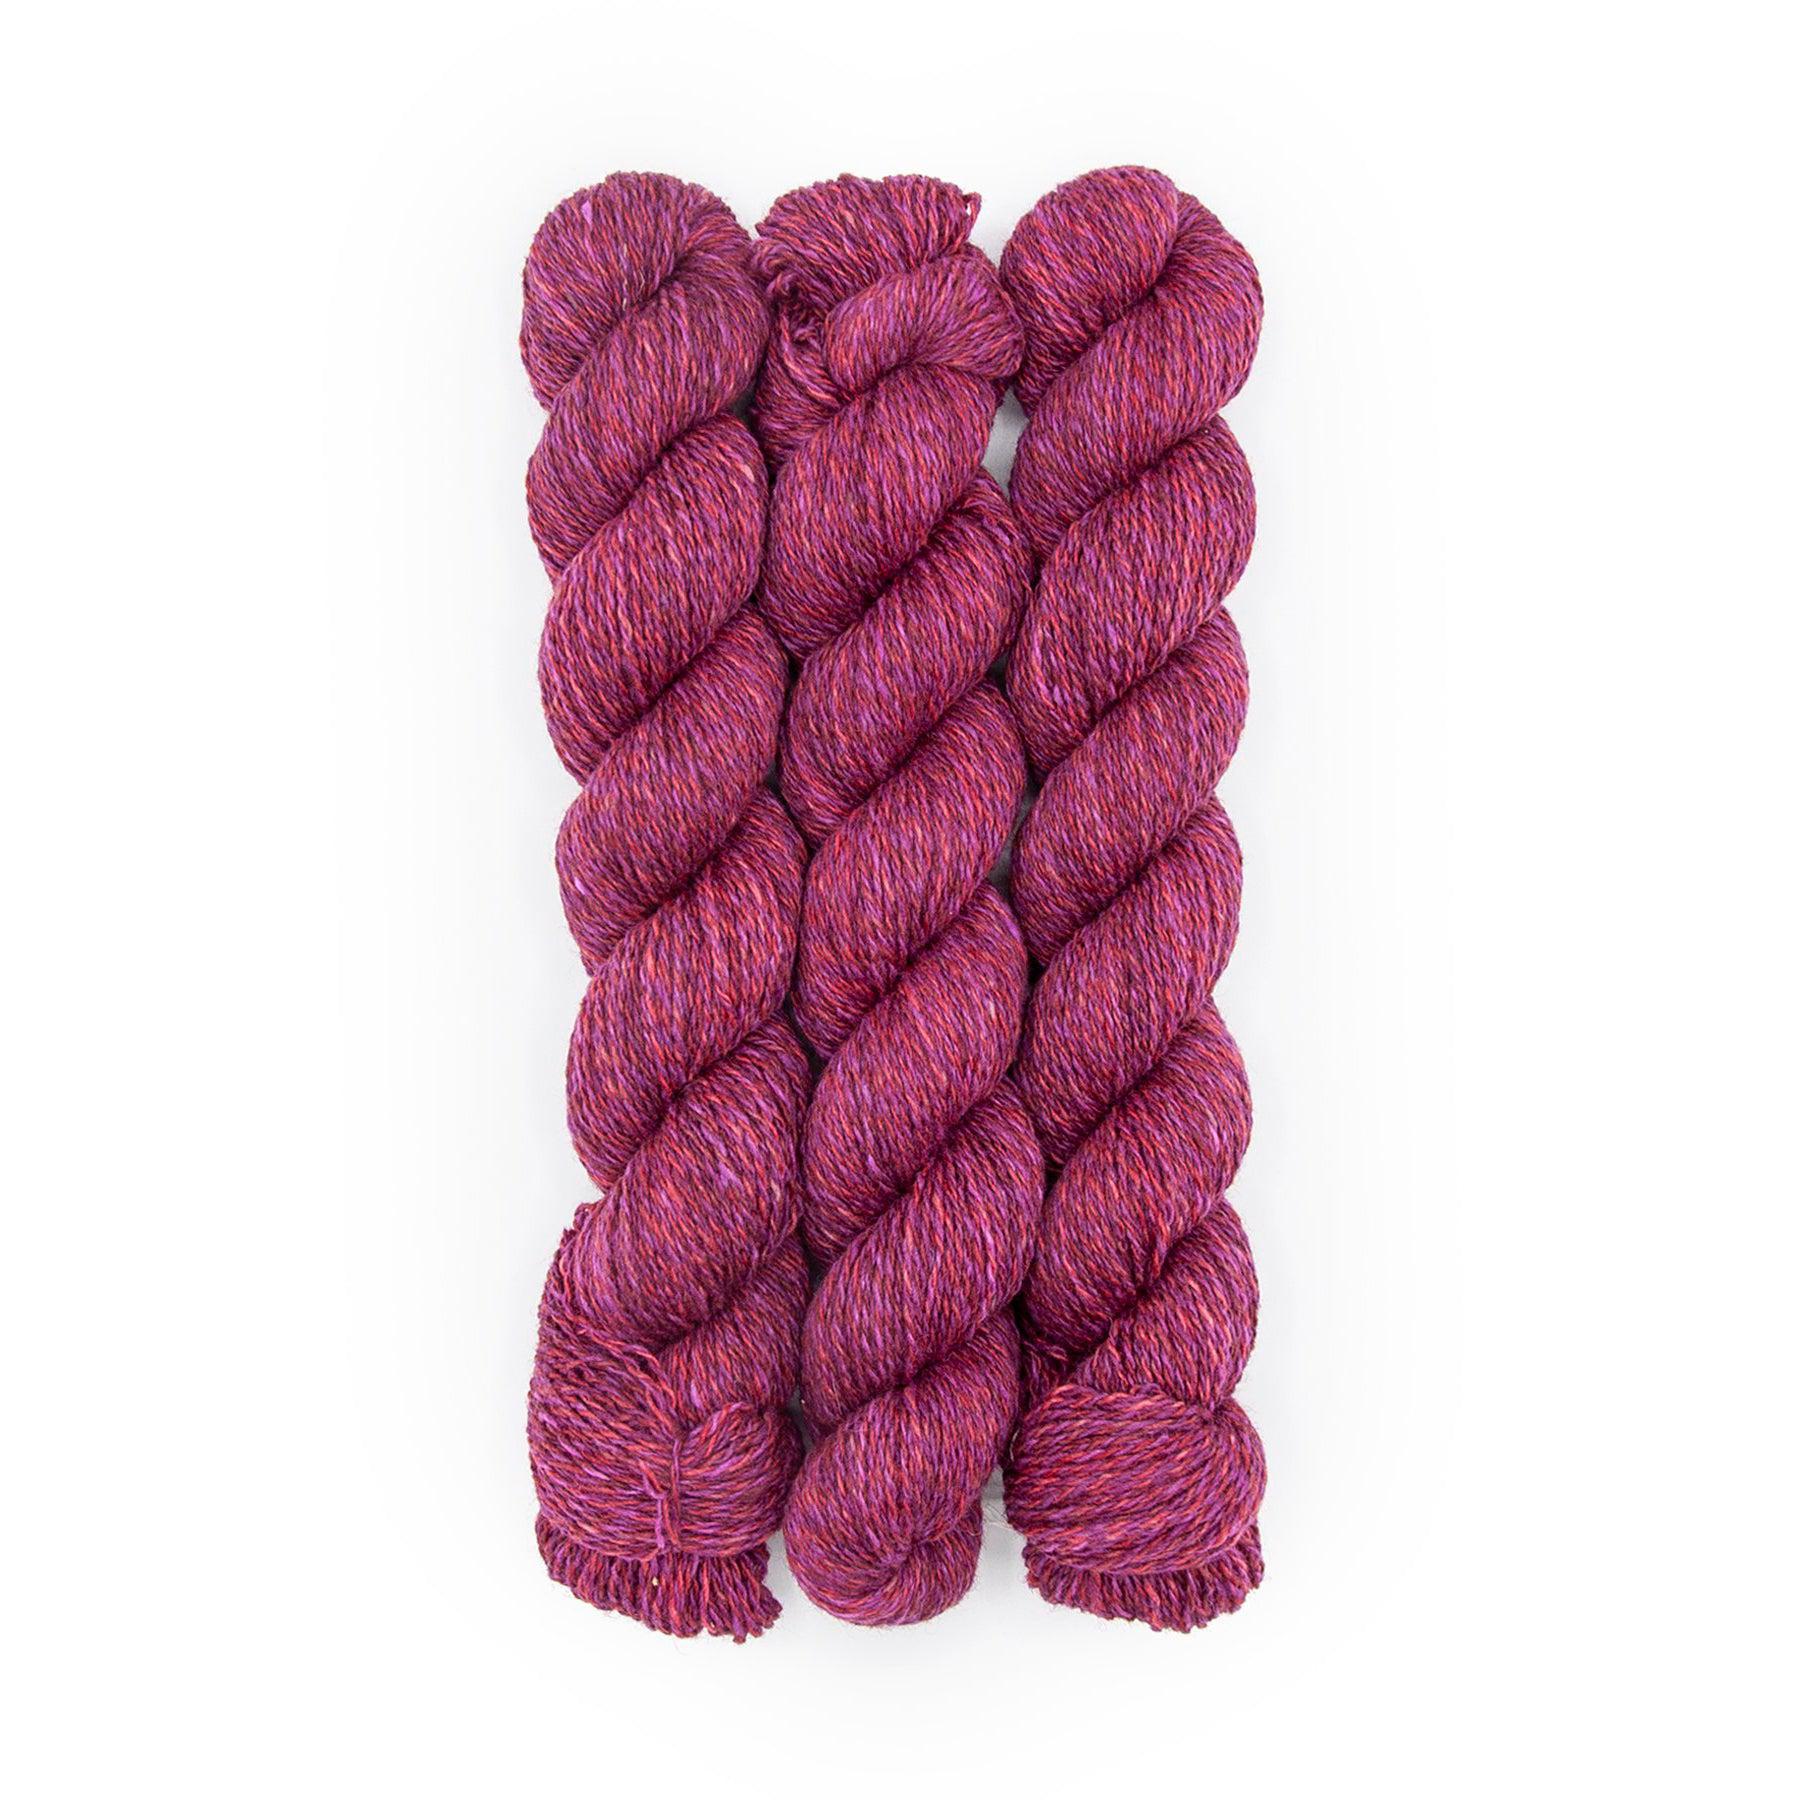 Plied Yarn North Ave Divine a marled yarn with pink, violet and maroon colors.